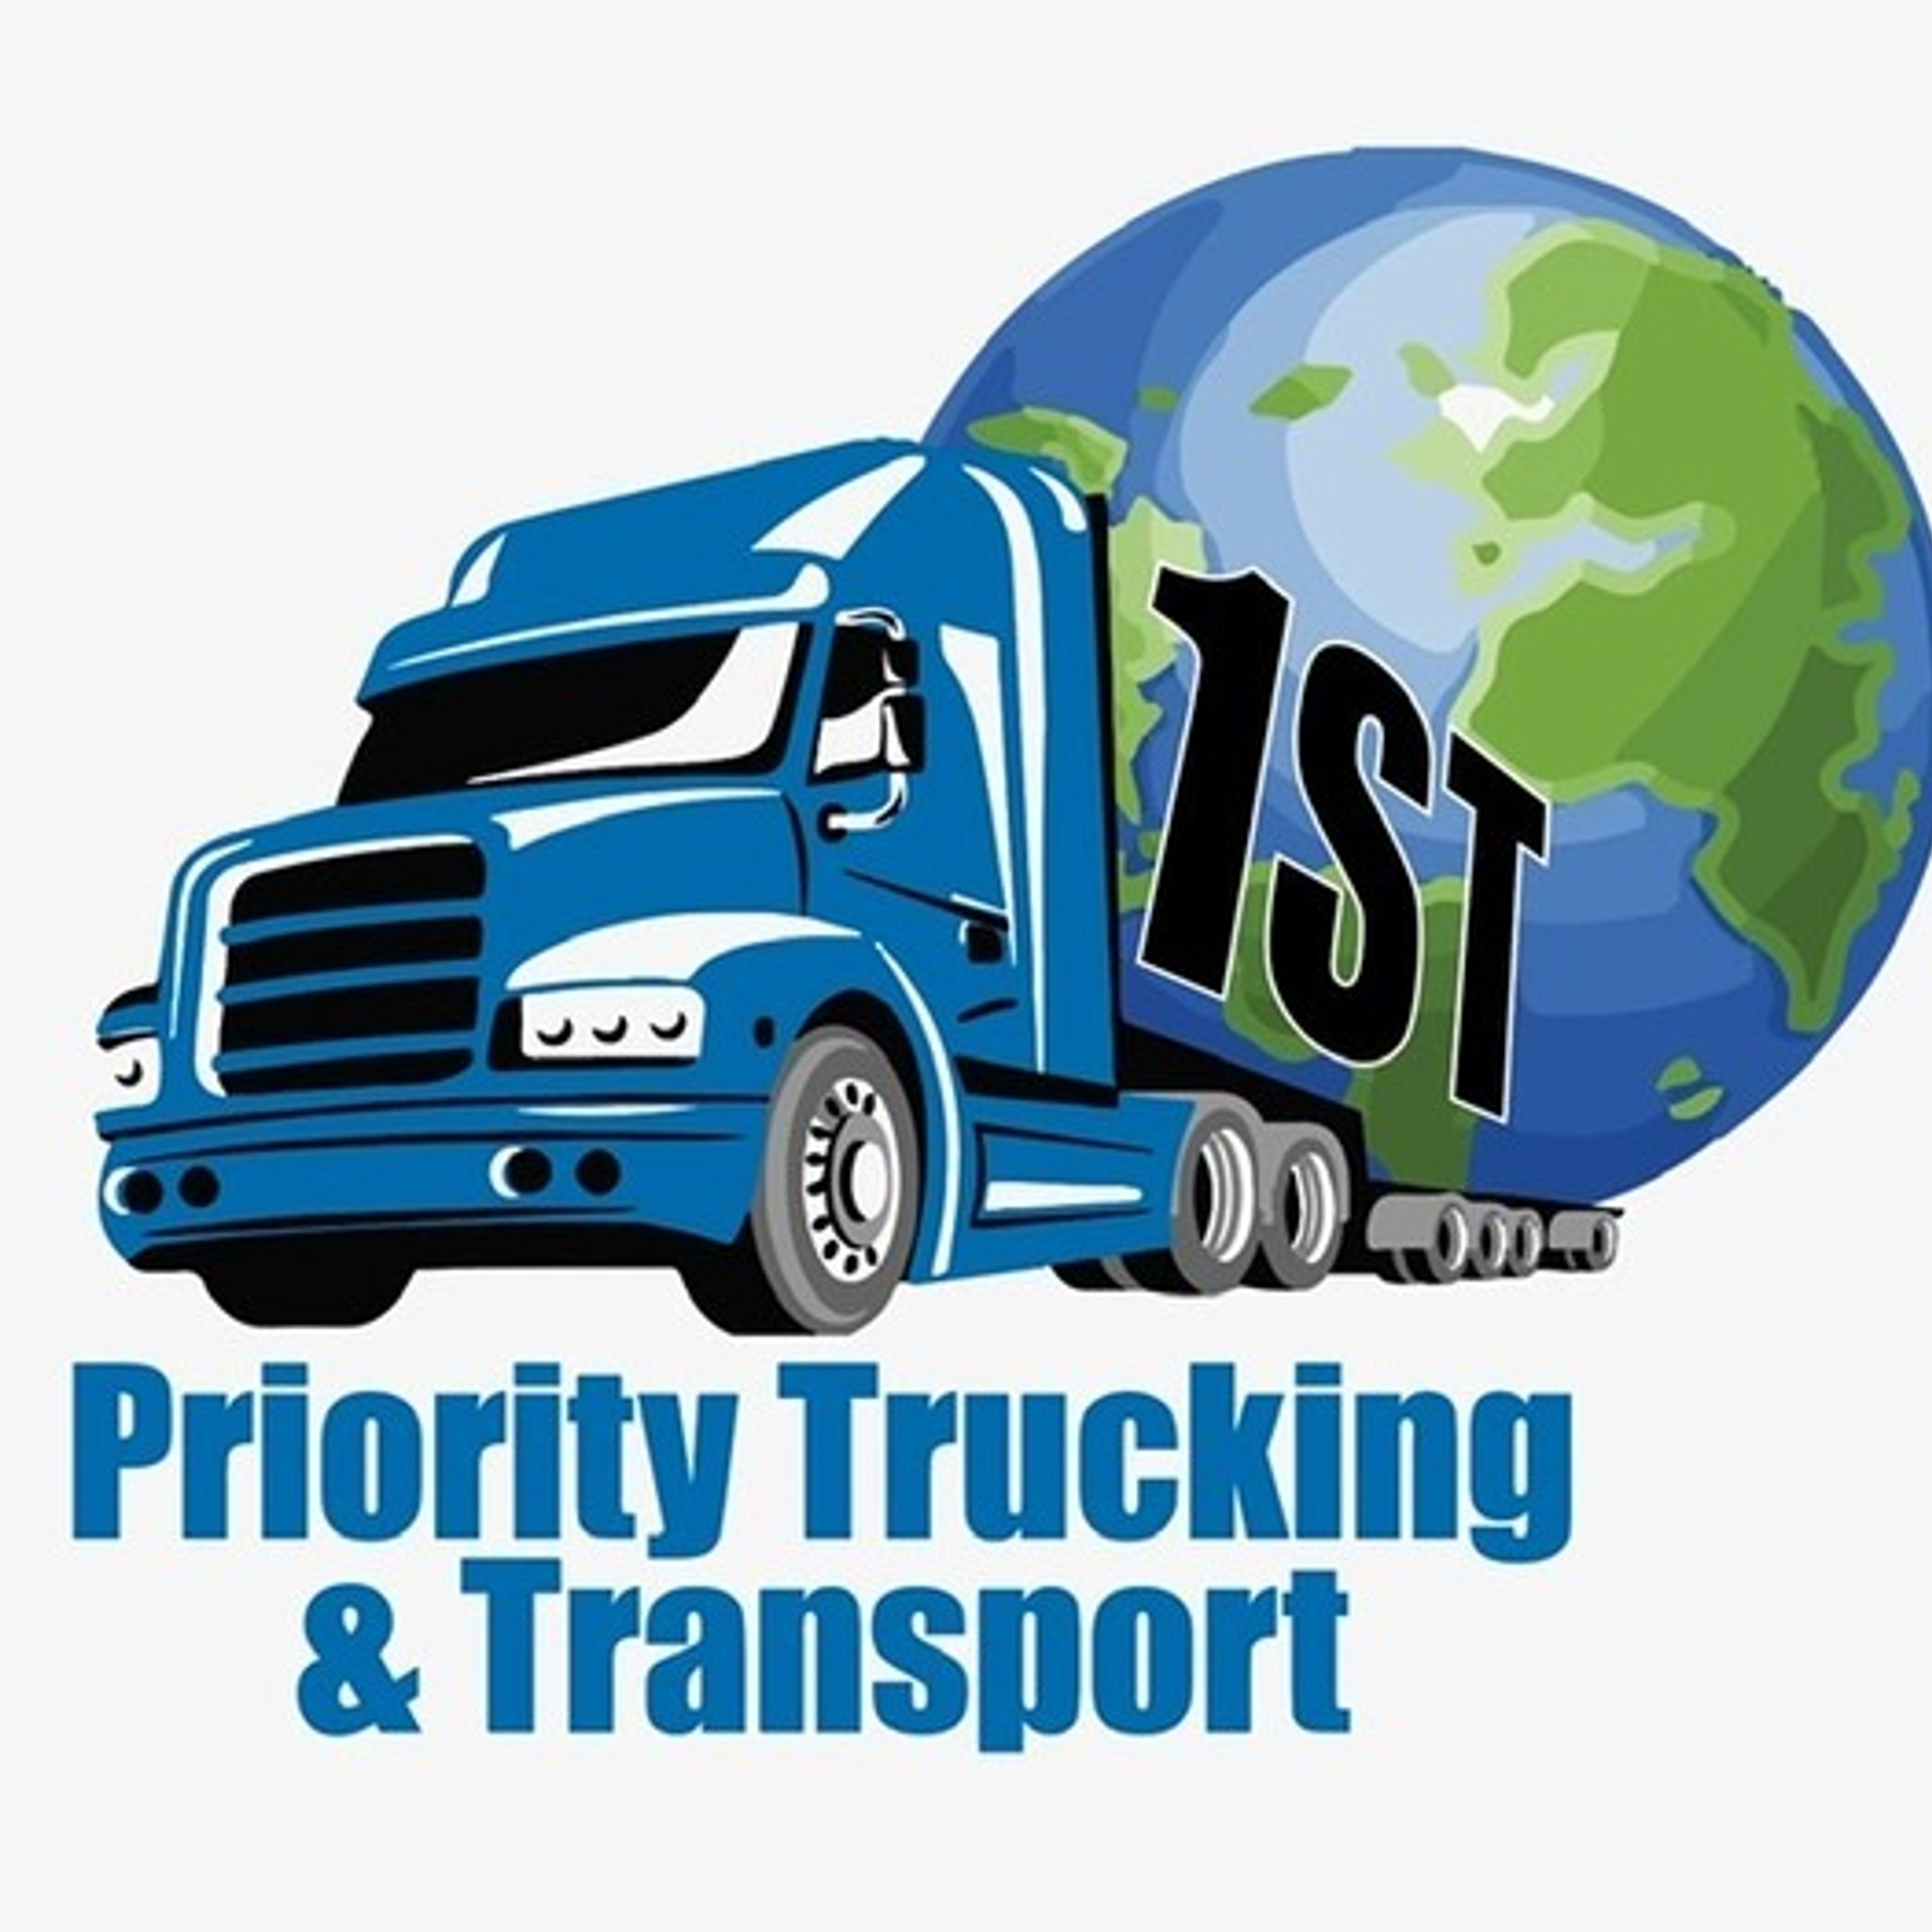 1stPriority truckingtransport is family environment where we can grown together and treat our drivers with good cares .